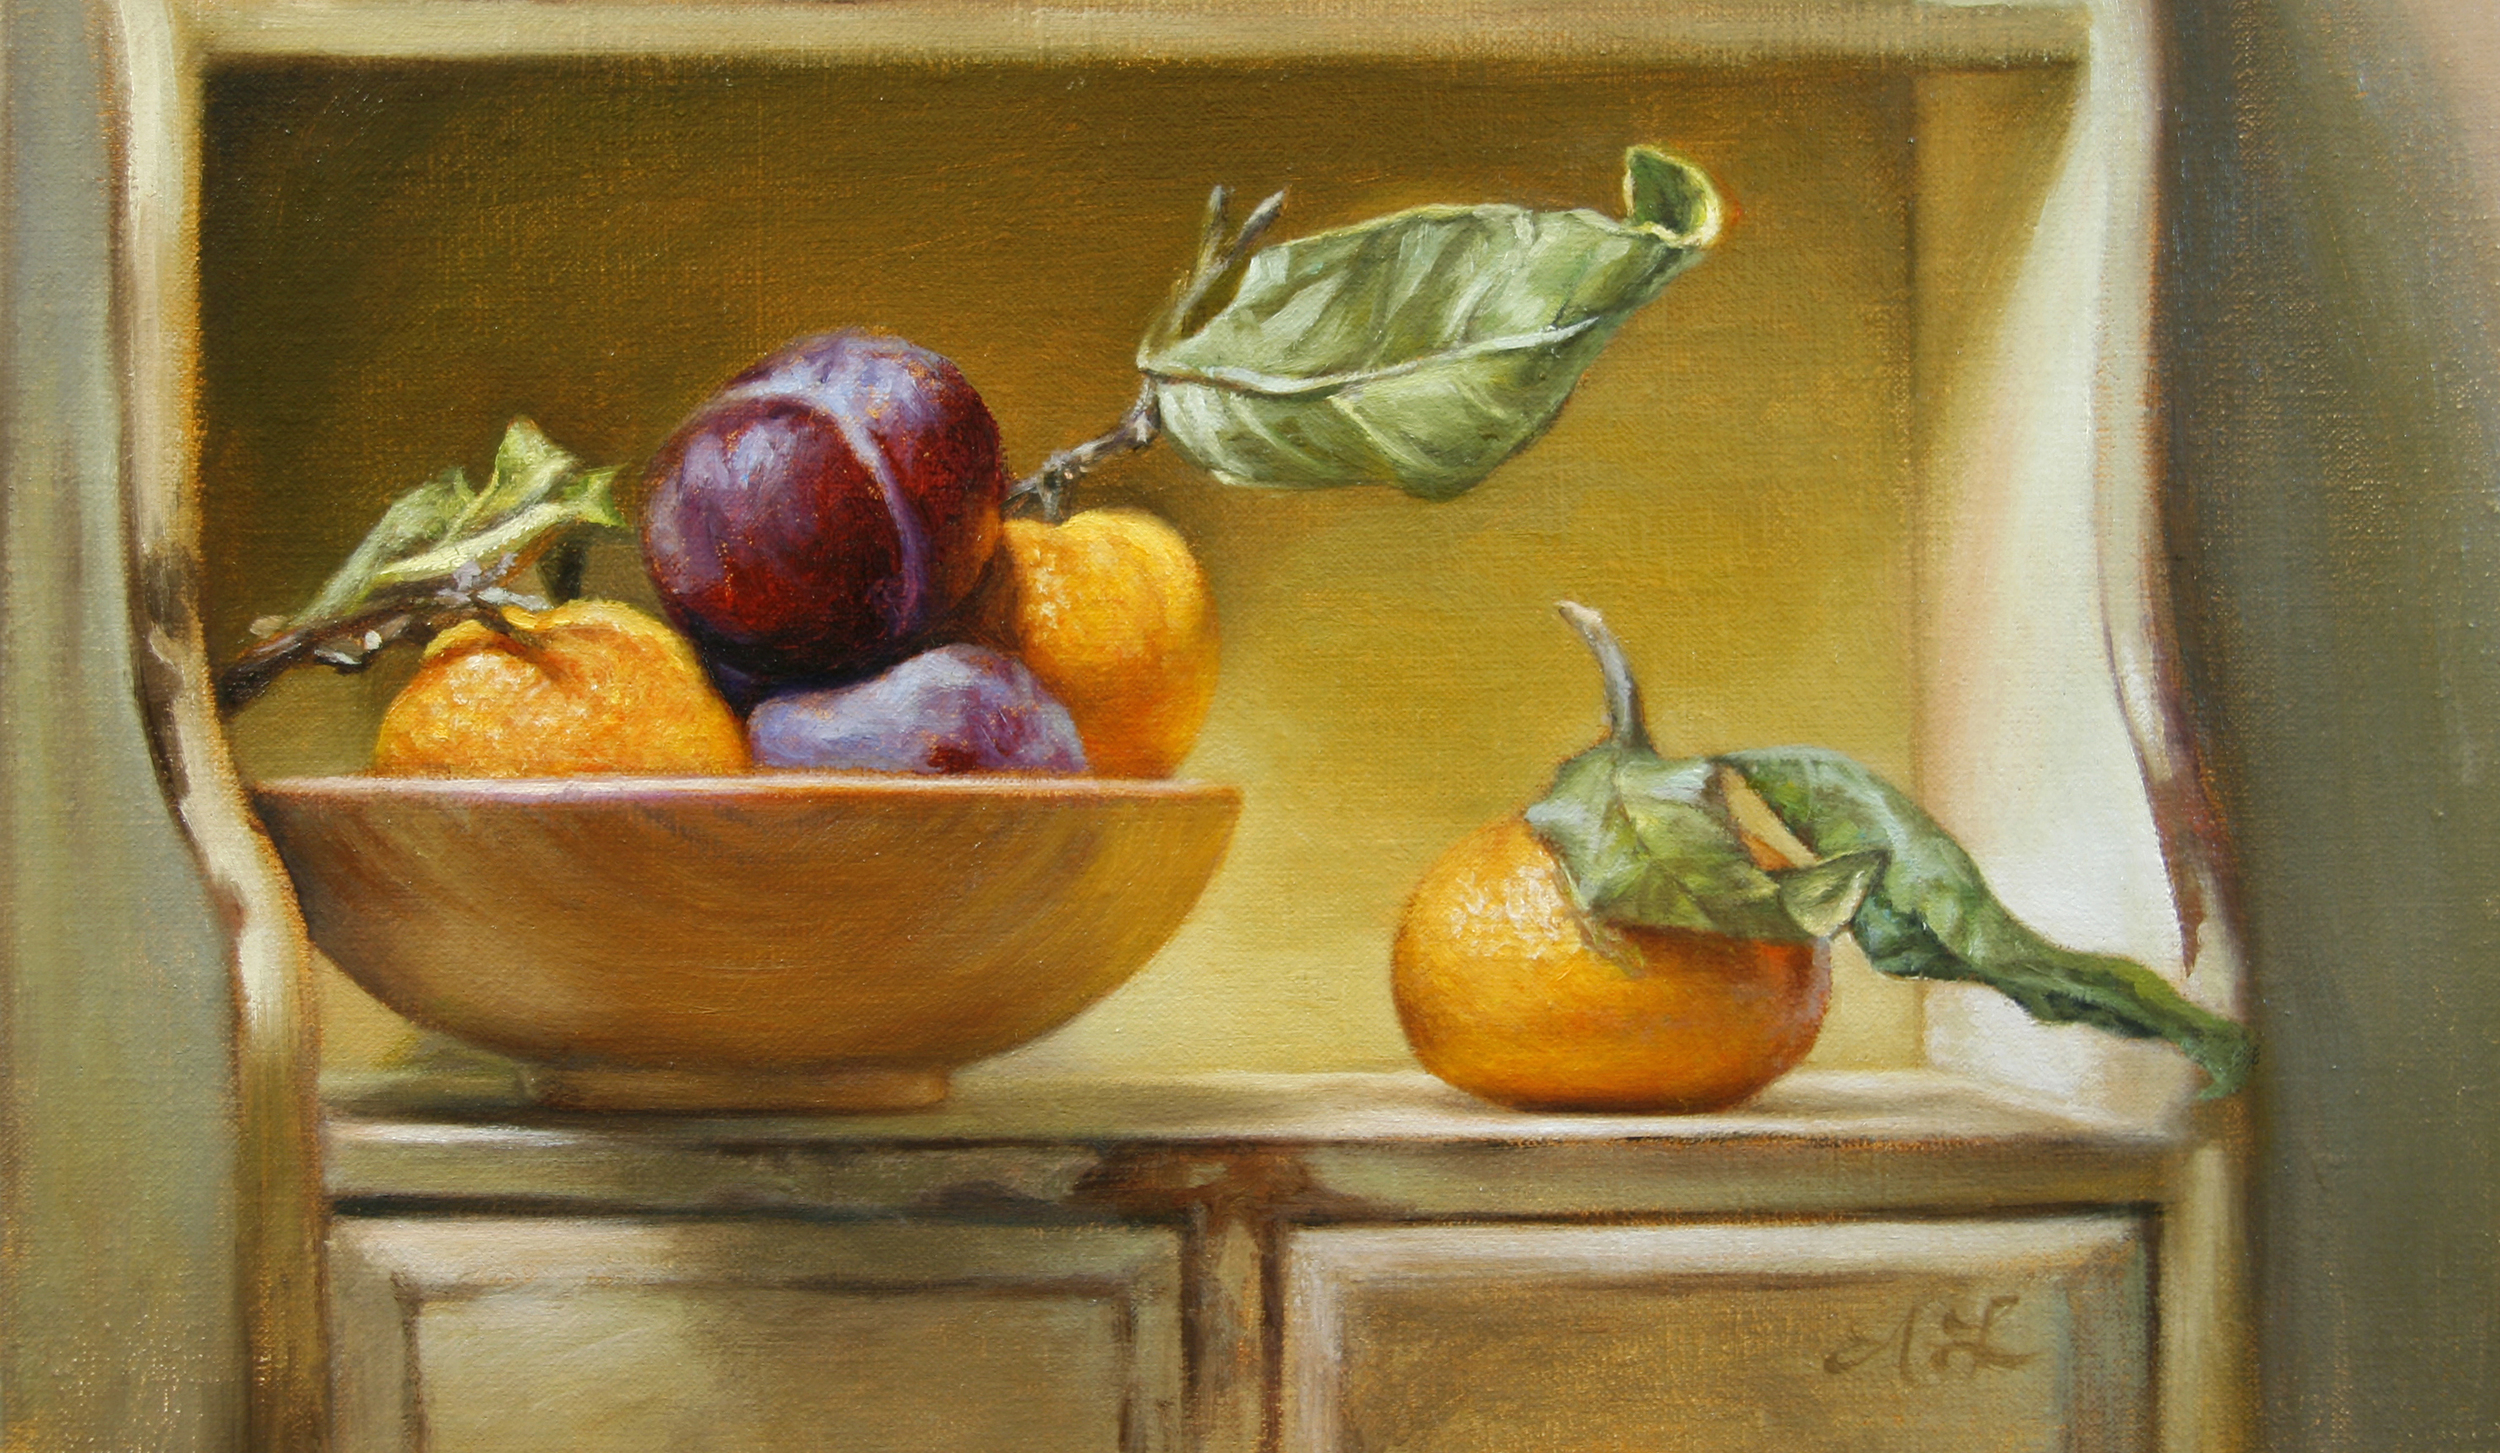   Oranges and Plums   7" x 12" &nbsp;&nbsp; Oil on Linen   SOLD 